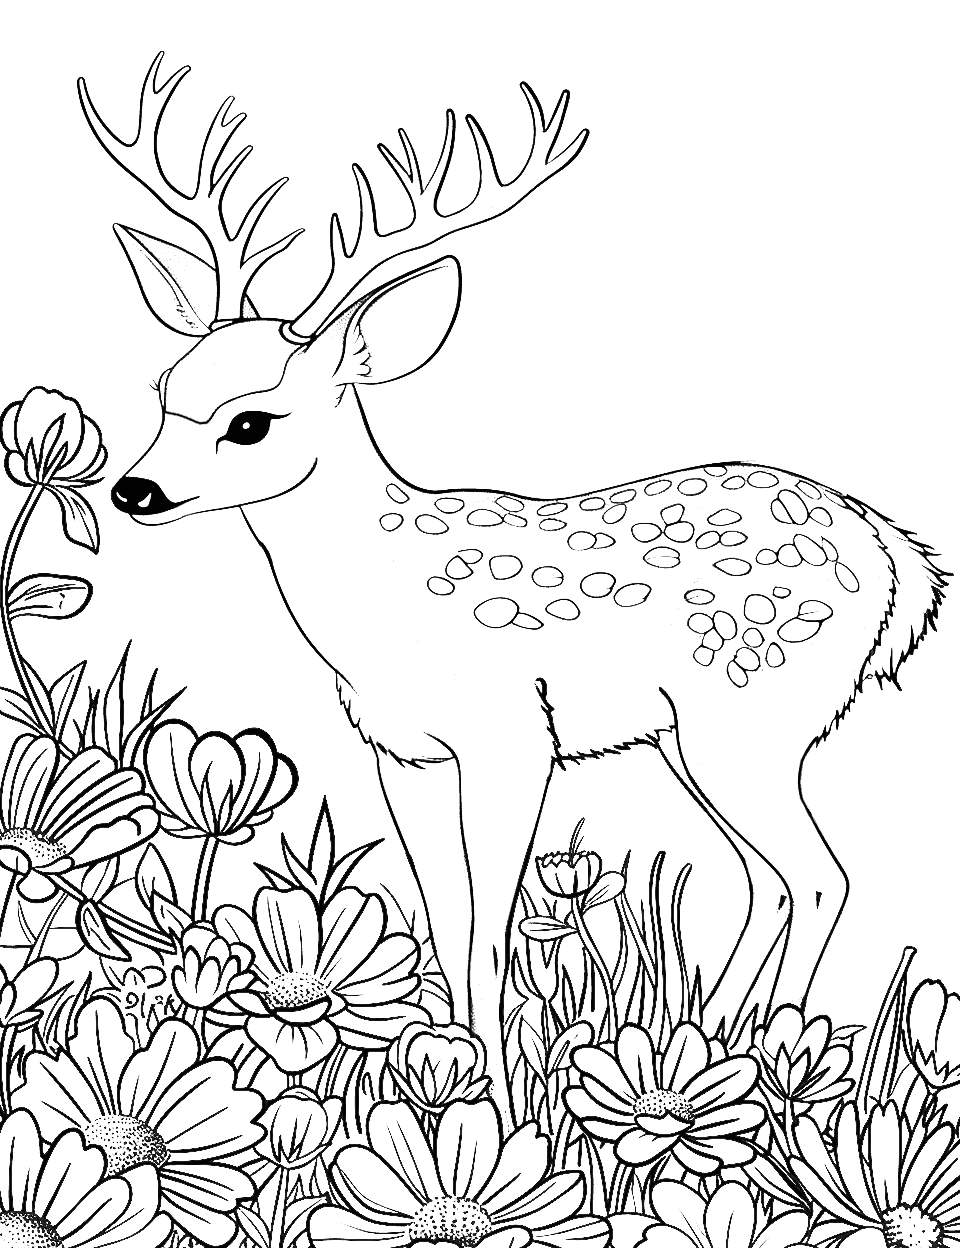 Small Deer by a Flower Garden Coloring Page - A diminutive deer sniffing flowers in a vibrant garden.